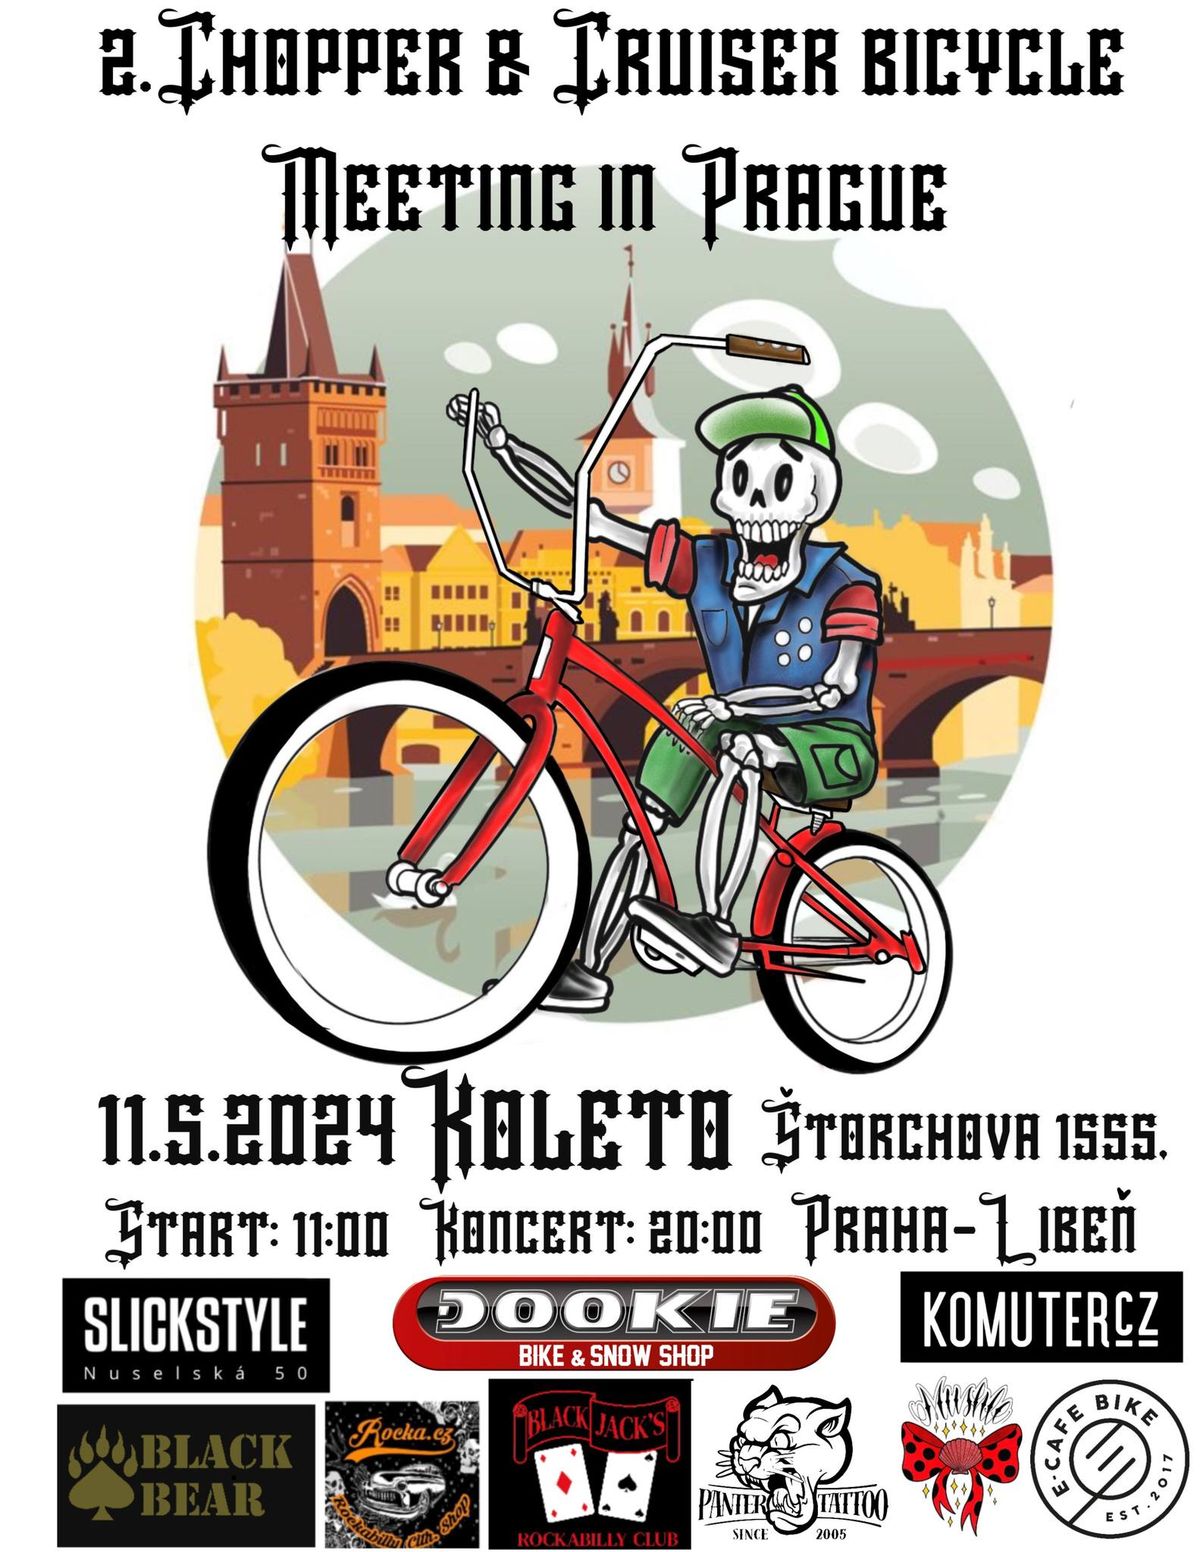 2nd Chopper and Cruiser bicycle meeting in Prague